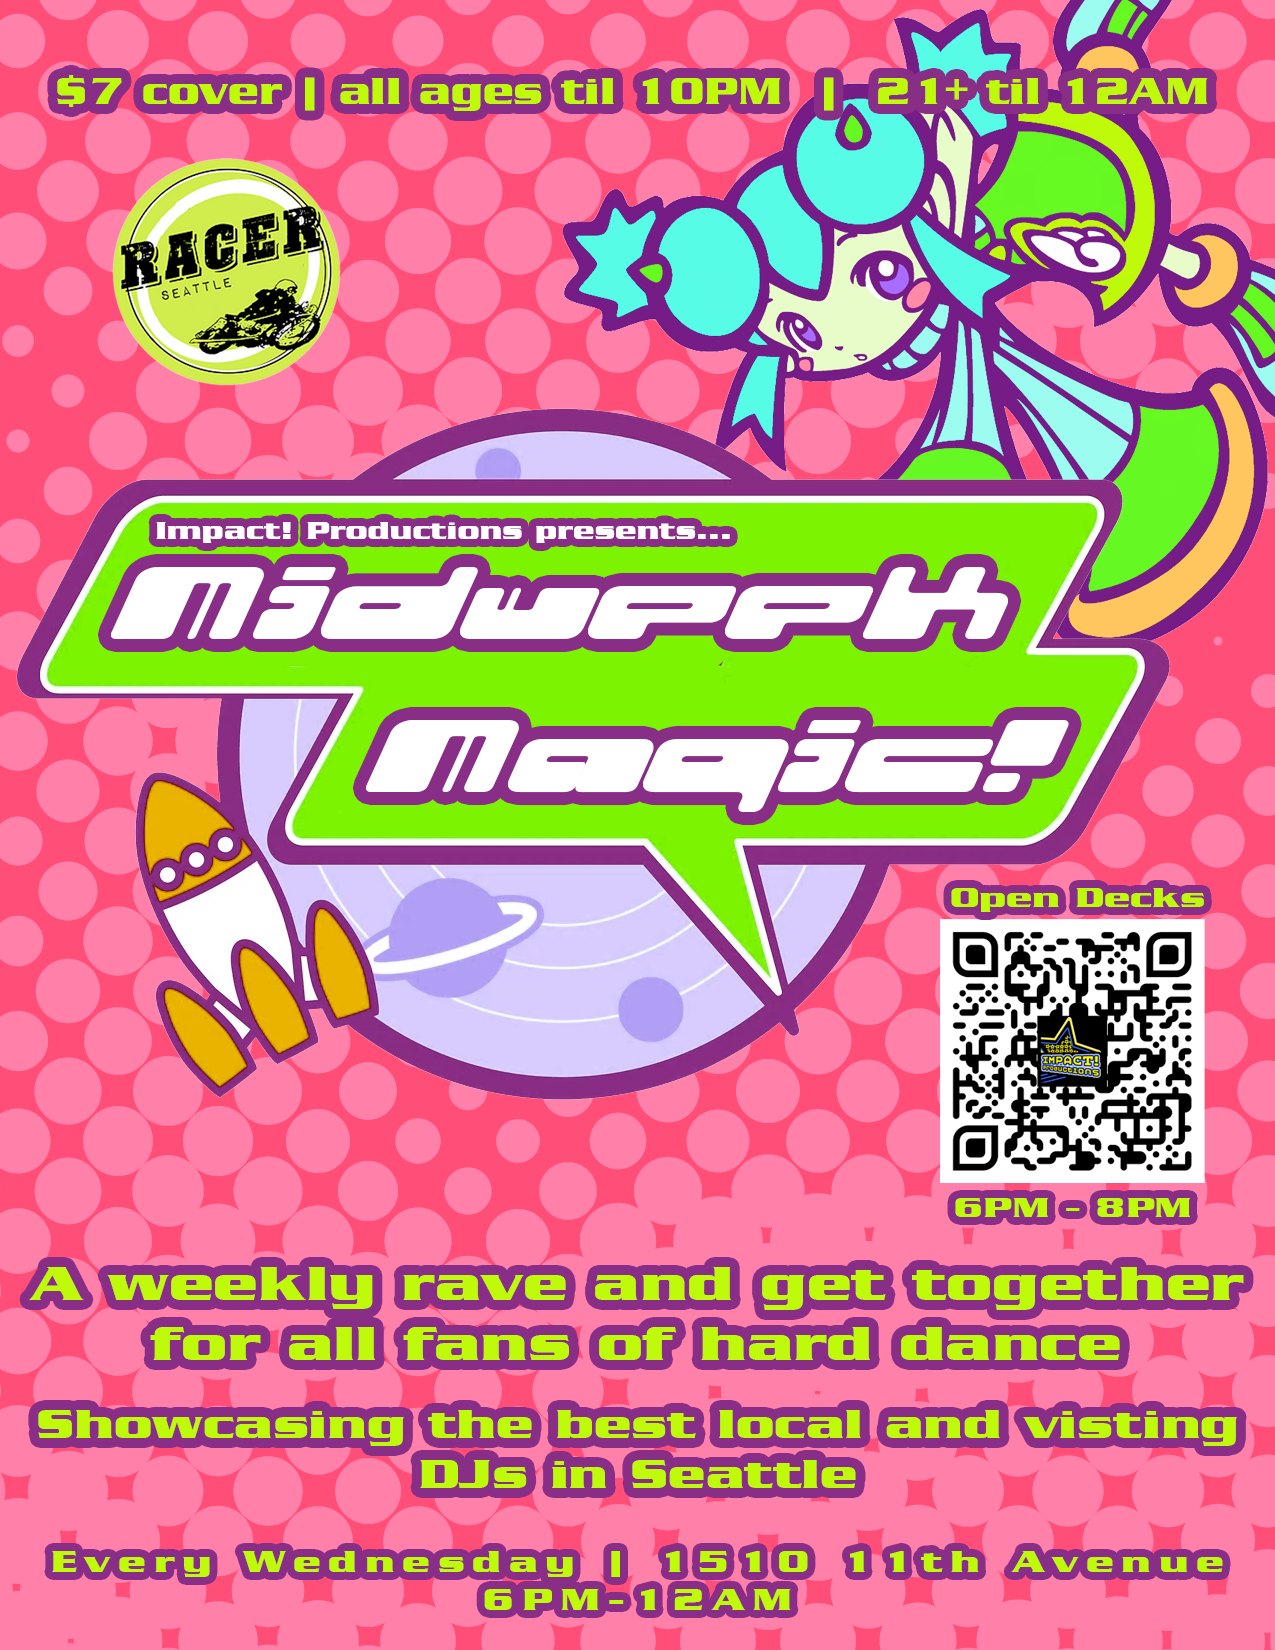 MIDWEEK MAGIC 5-10-23 AT CAFE RACER BY IMPACT! PRODUCTIONS SEATTLE POSTER FLYER